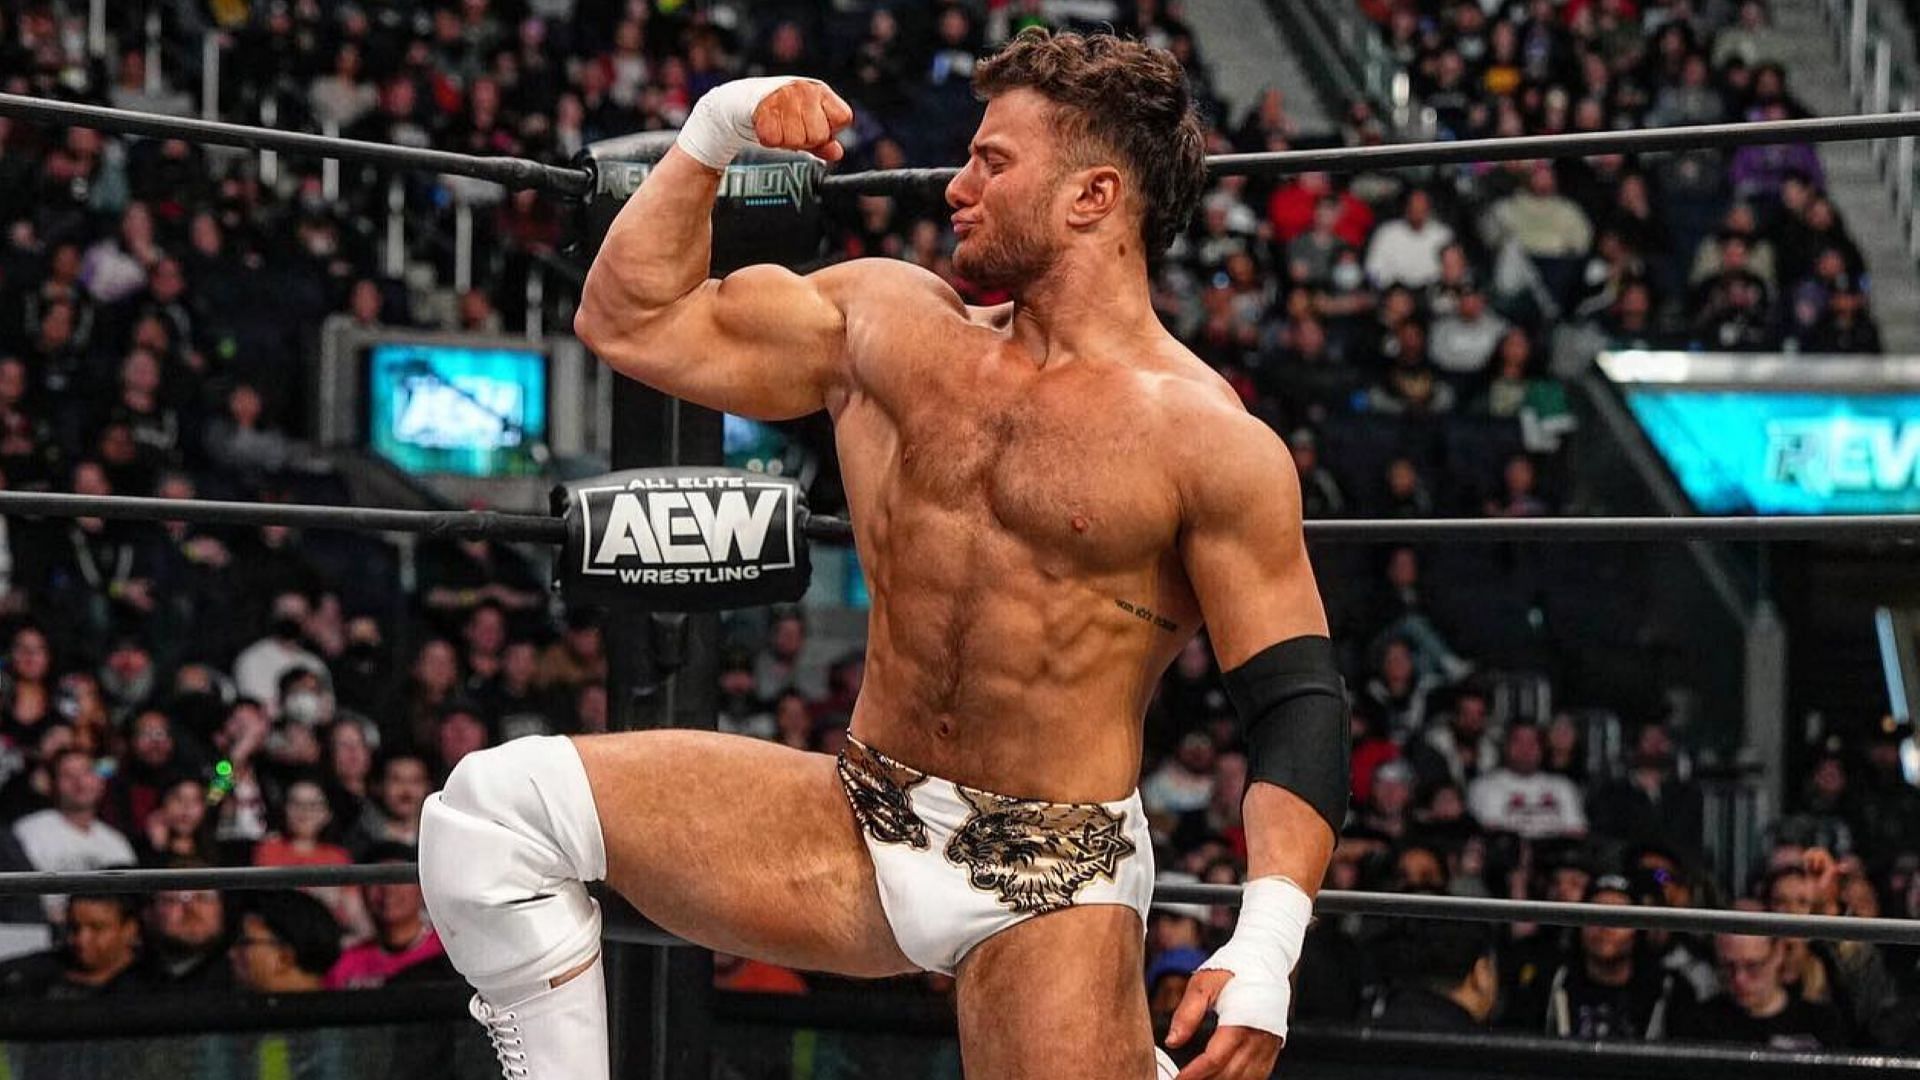 MJF shows off inside the AEW ring